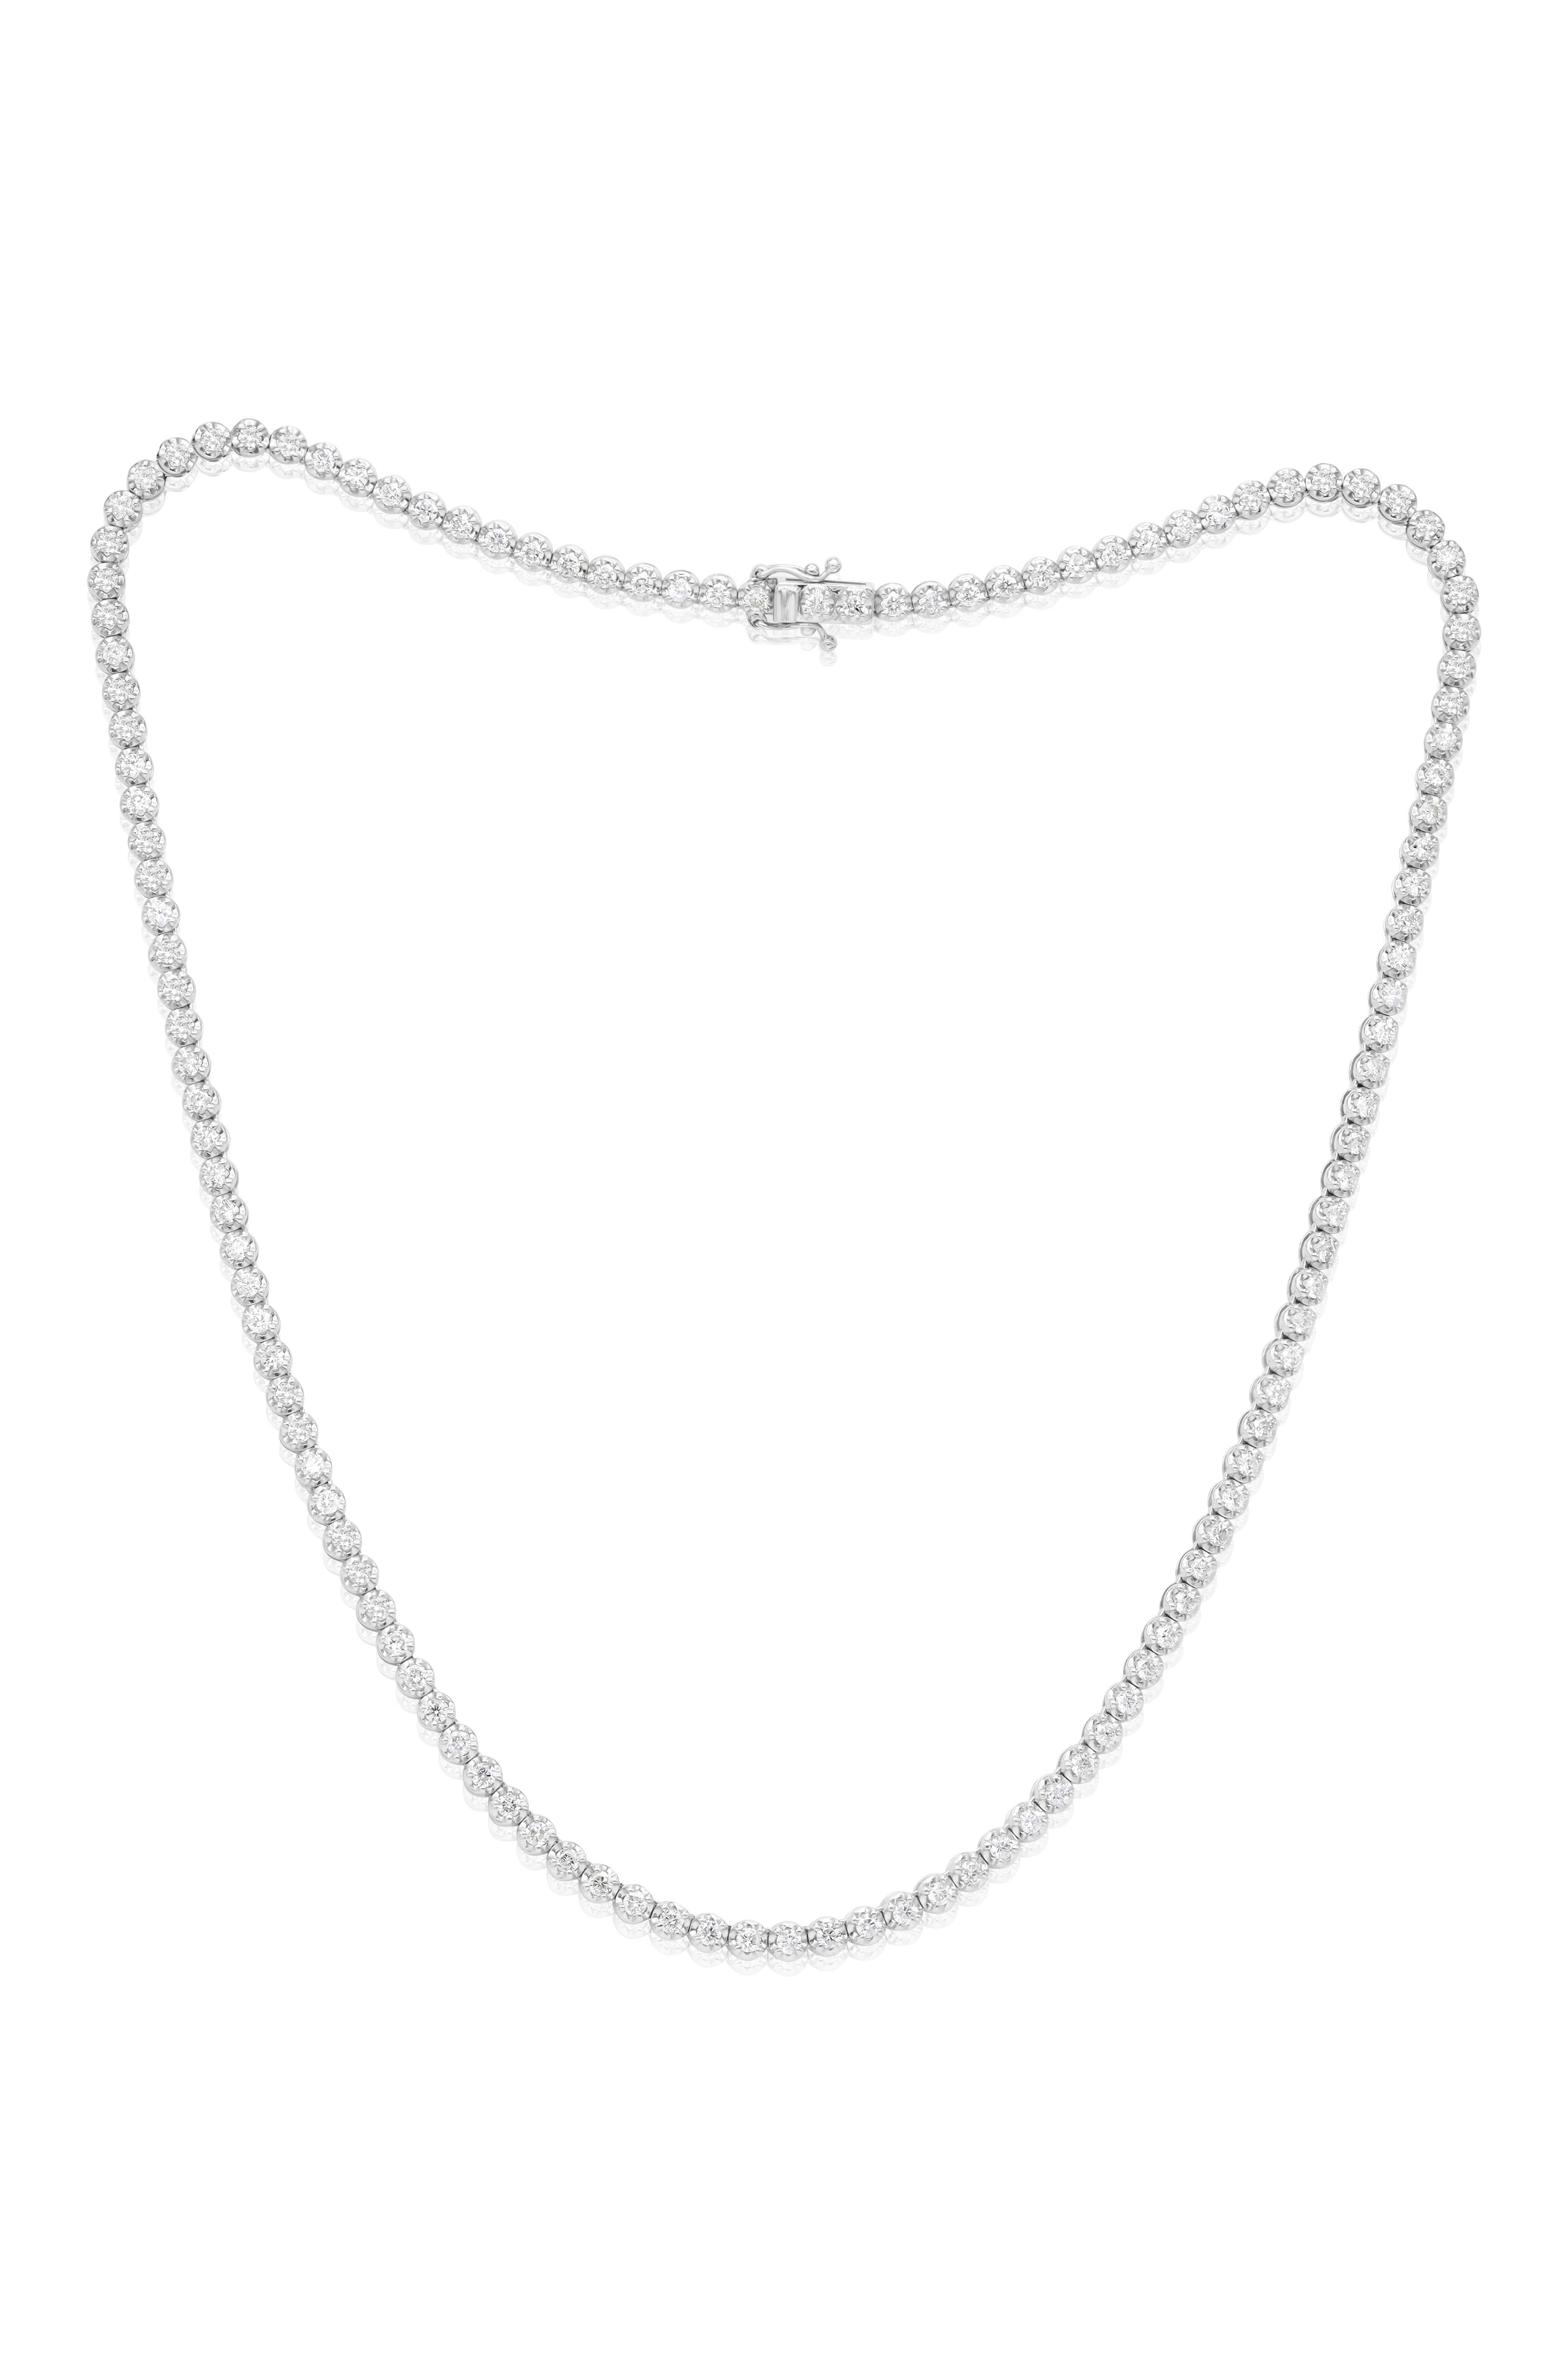 Modern Diana M, Custom 14.00 cts Round 4 Prong Diamond 18K White Gold Tennis Necklace For Sale